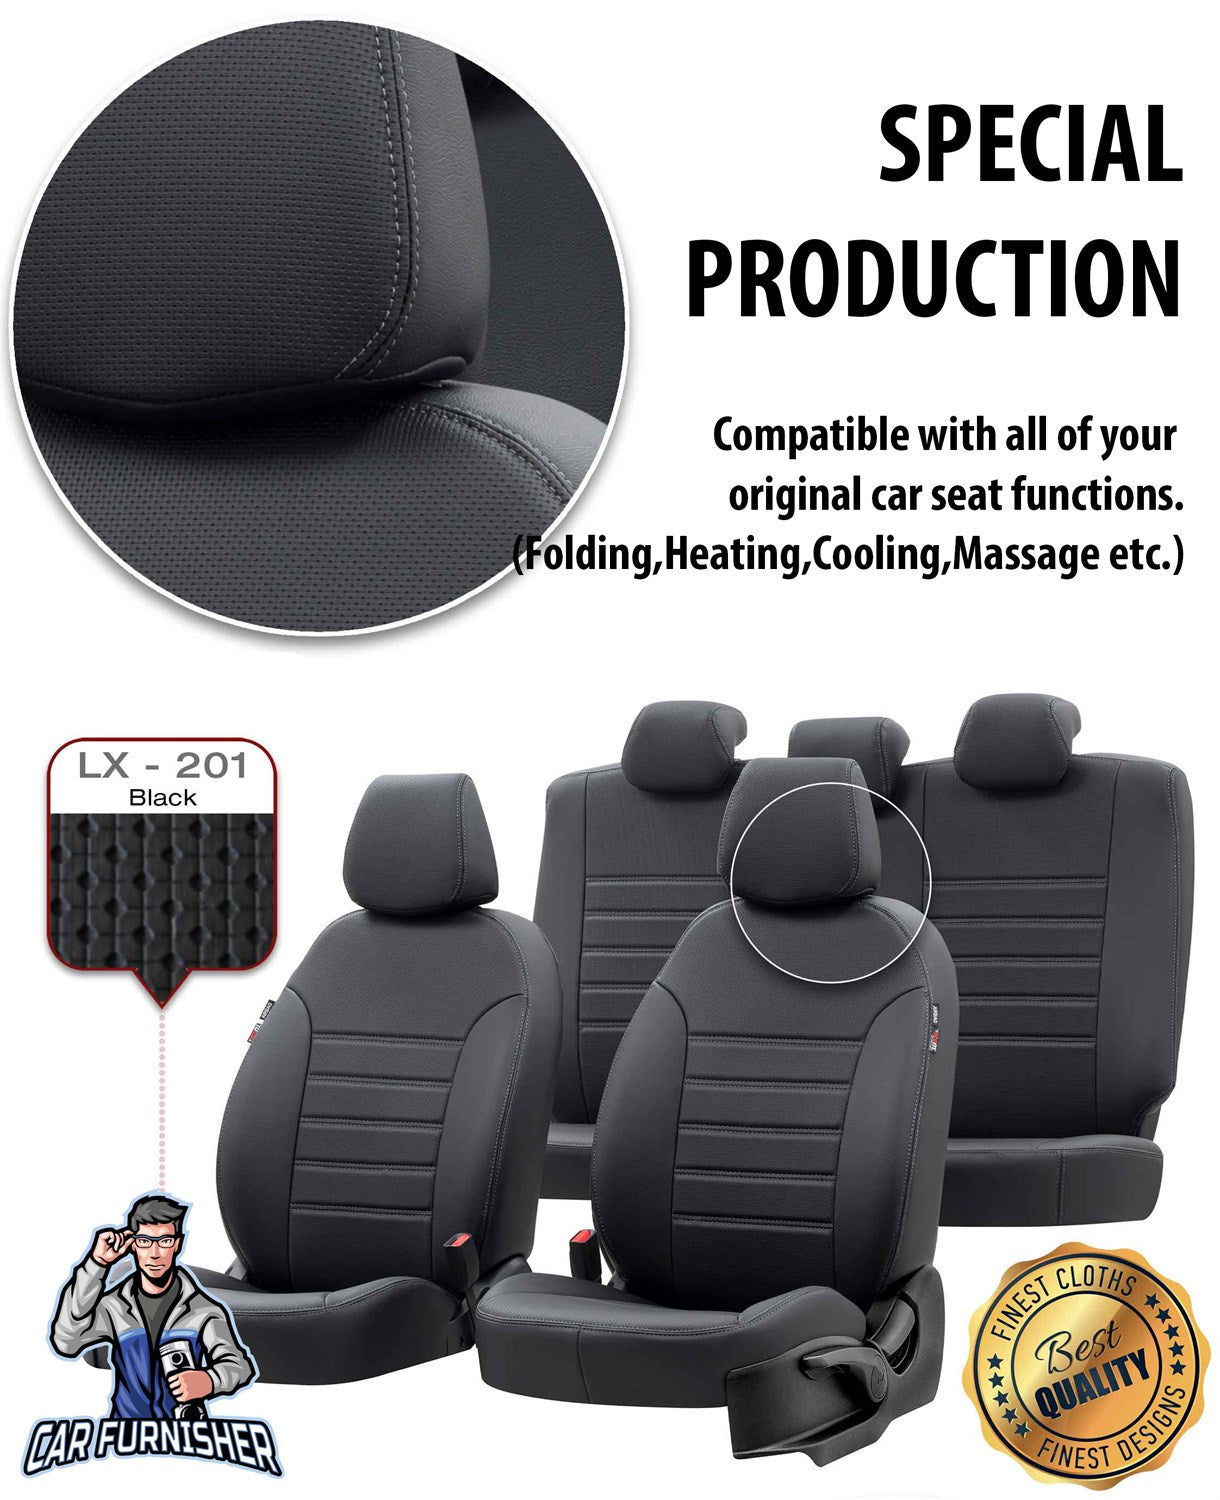 Seat Toledo Seat Covers New York Leather Design Smoked Leather